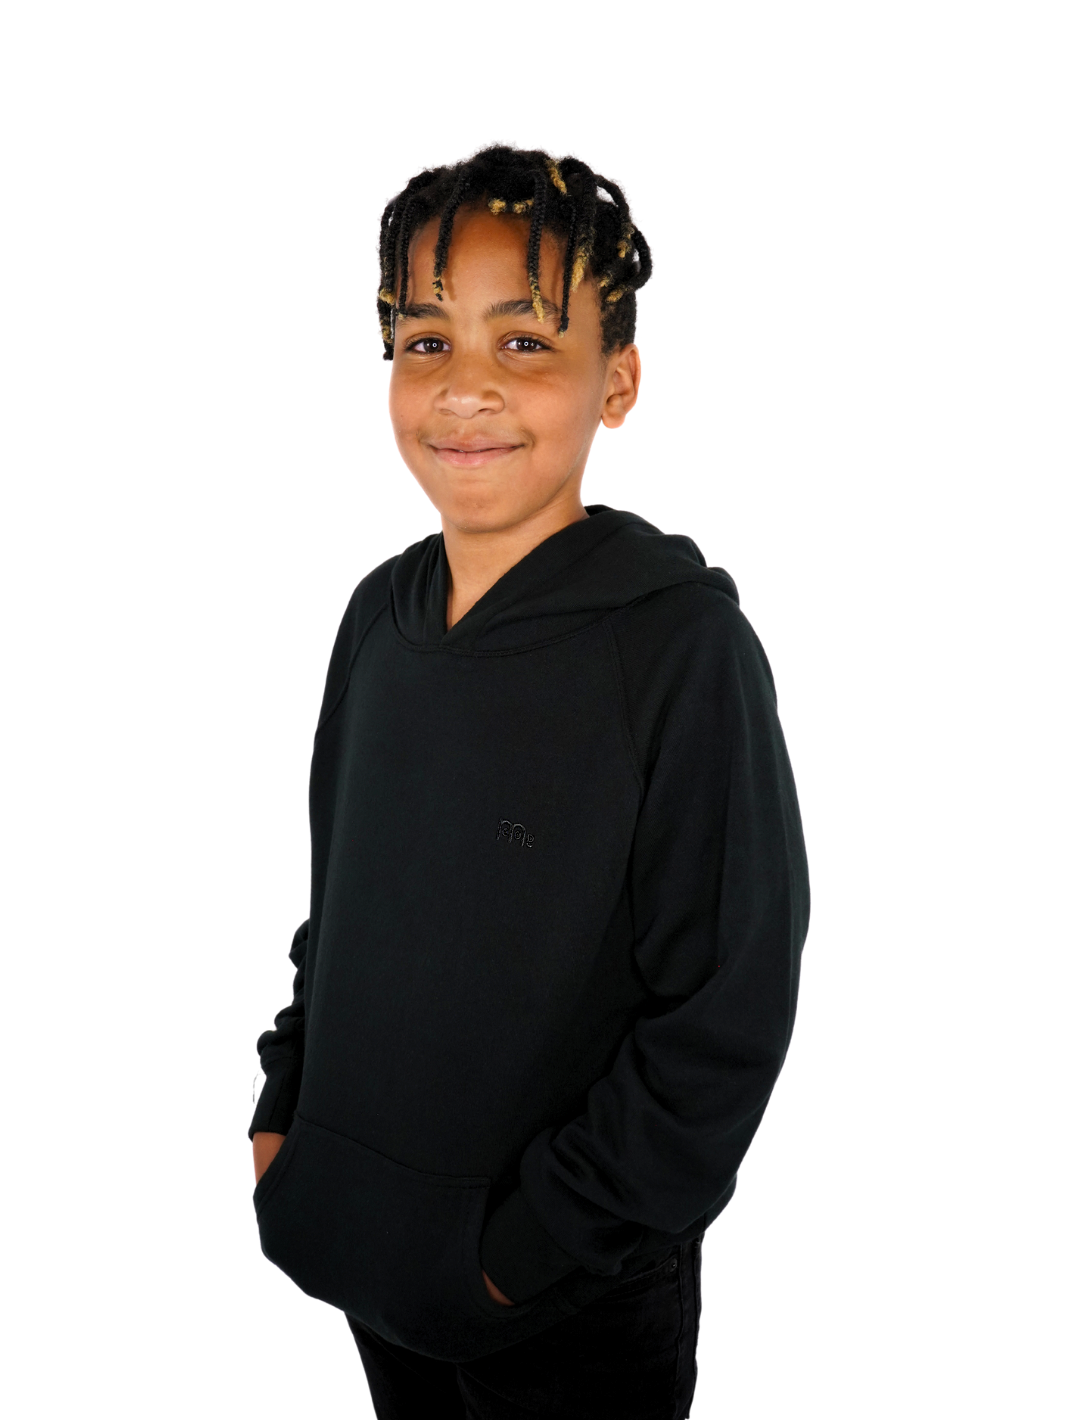 Youth Pullover Hoodie Black with Black logo at left chest. Sizes 6 to 16